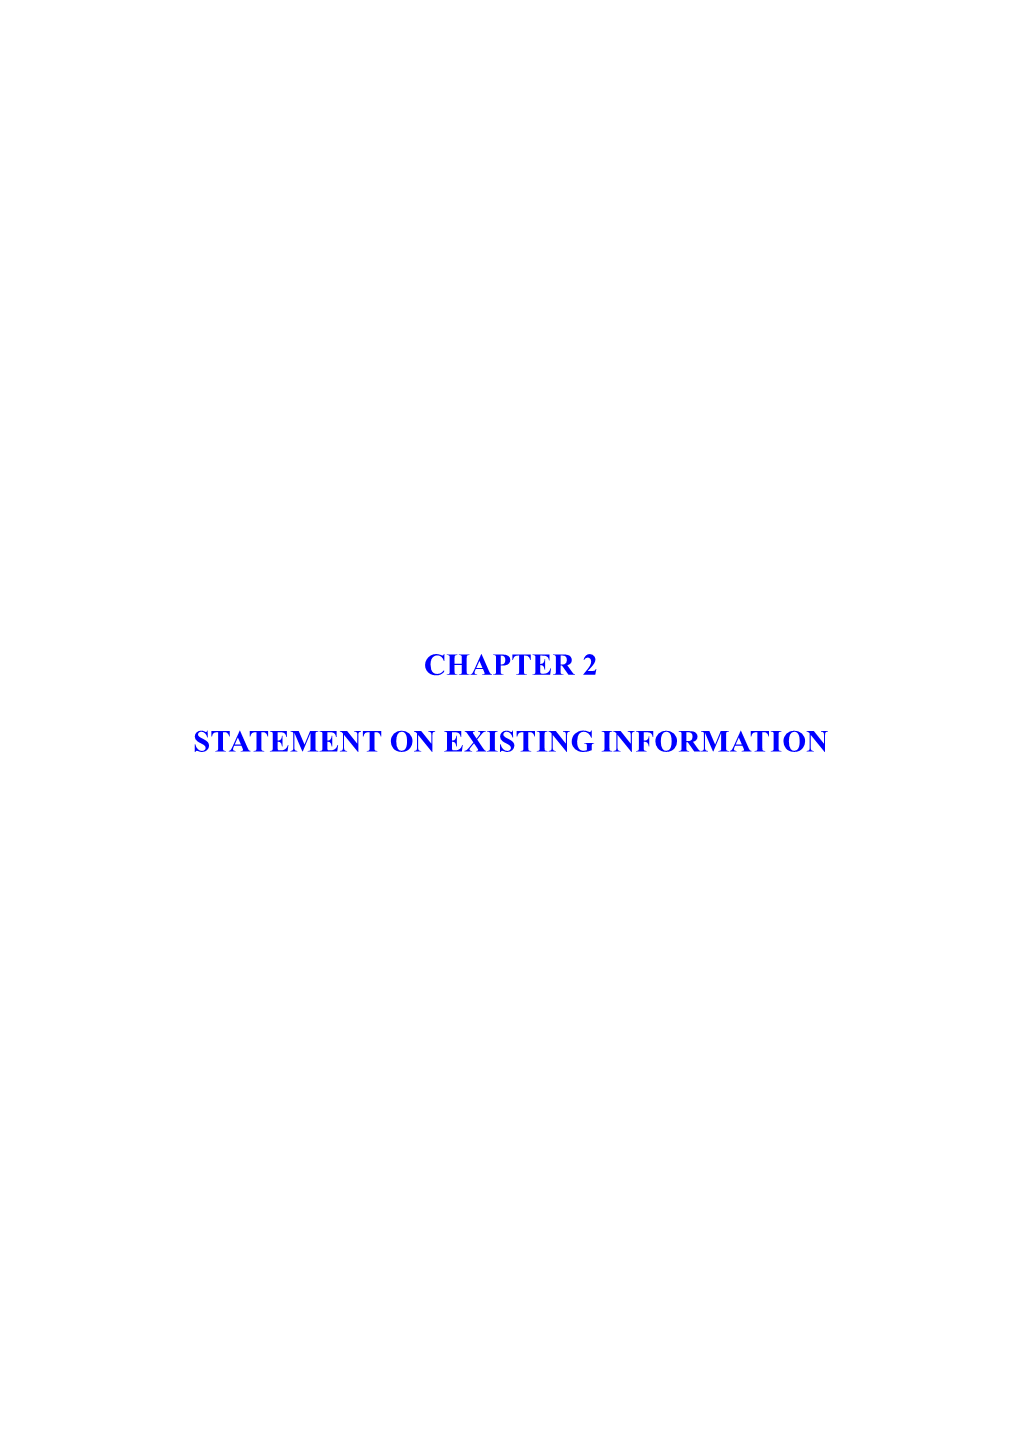 Chapter 2 Statement on Existing Information